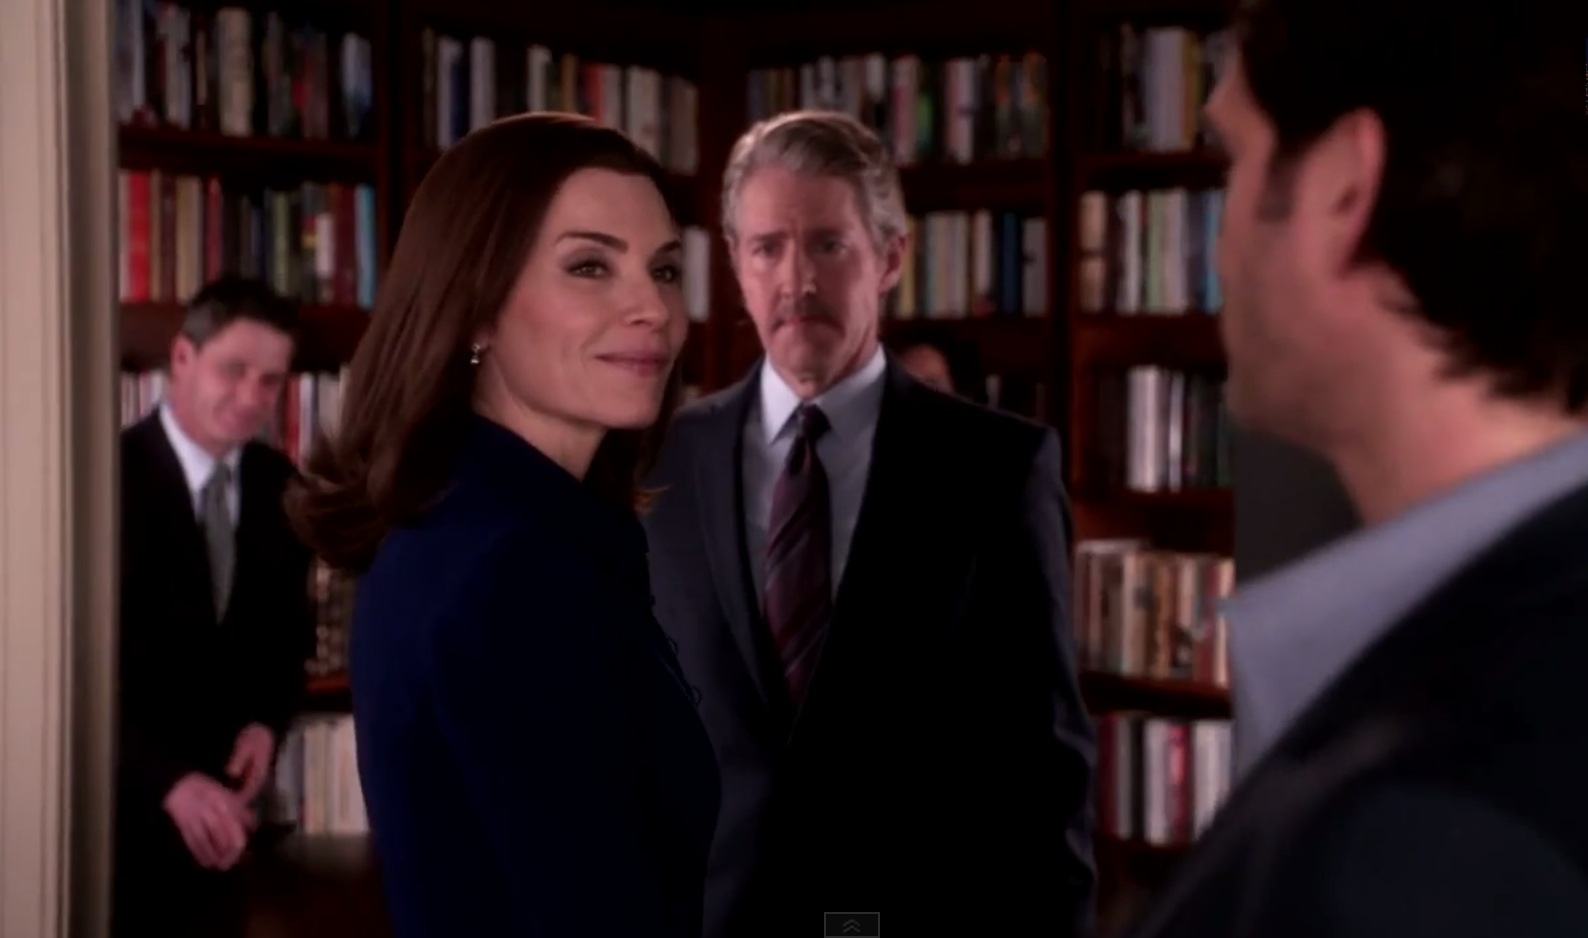 The Good Wife - Mind's Eye - Review: "We're Not Voting For a Saint"